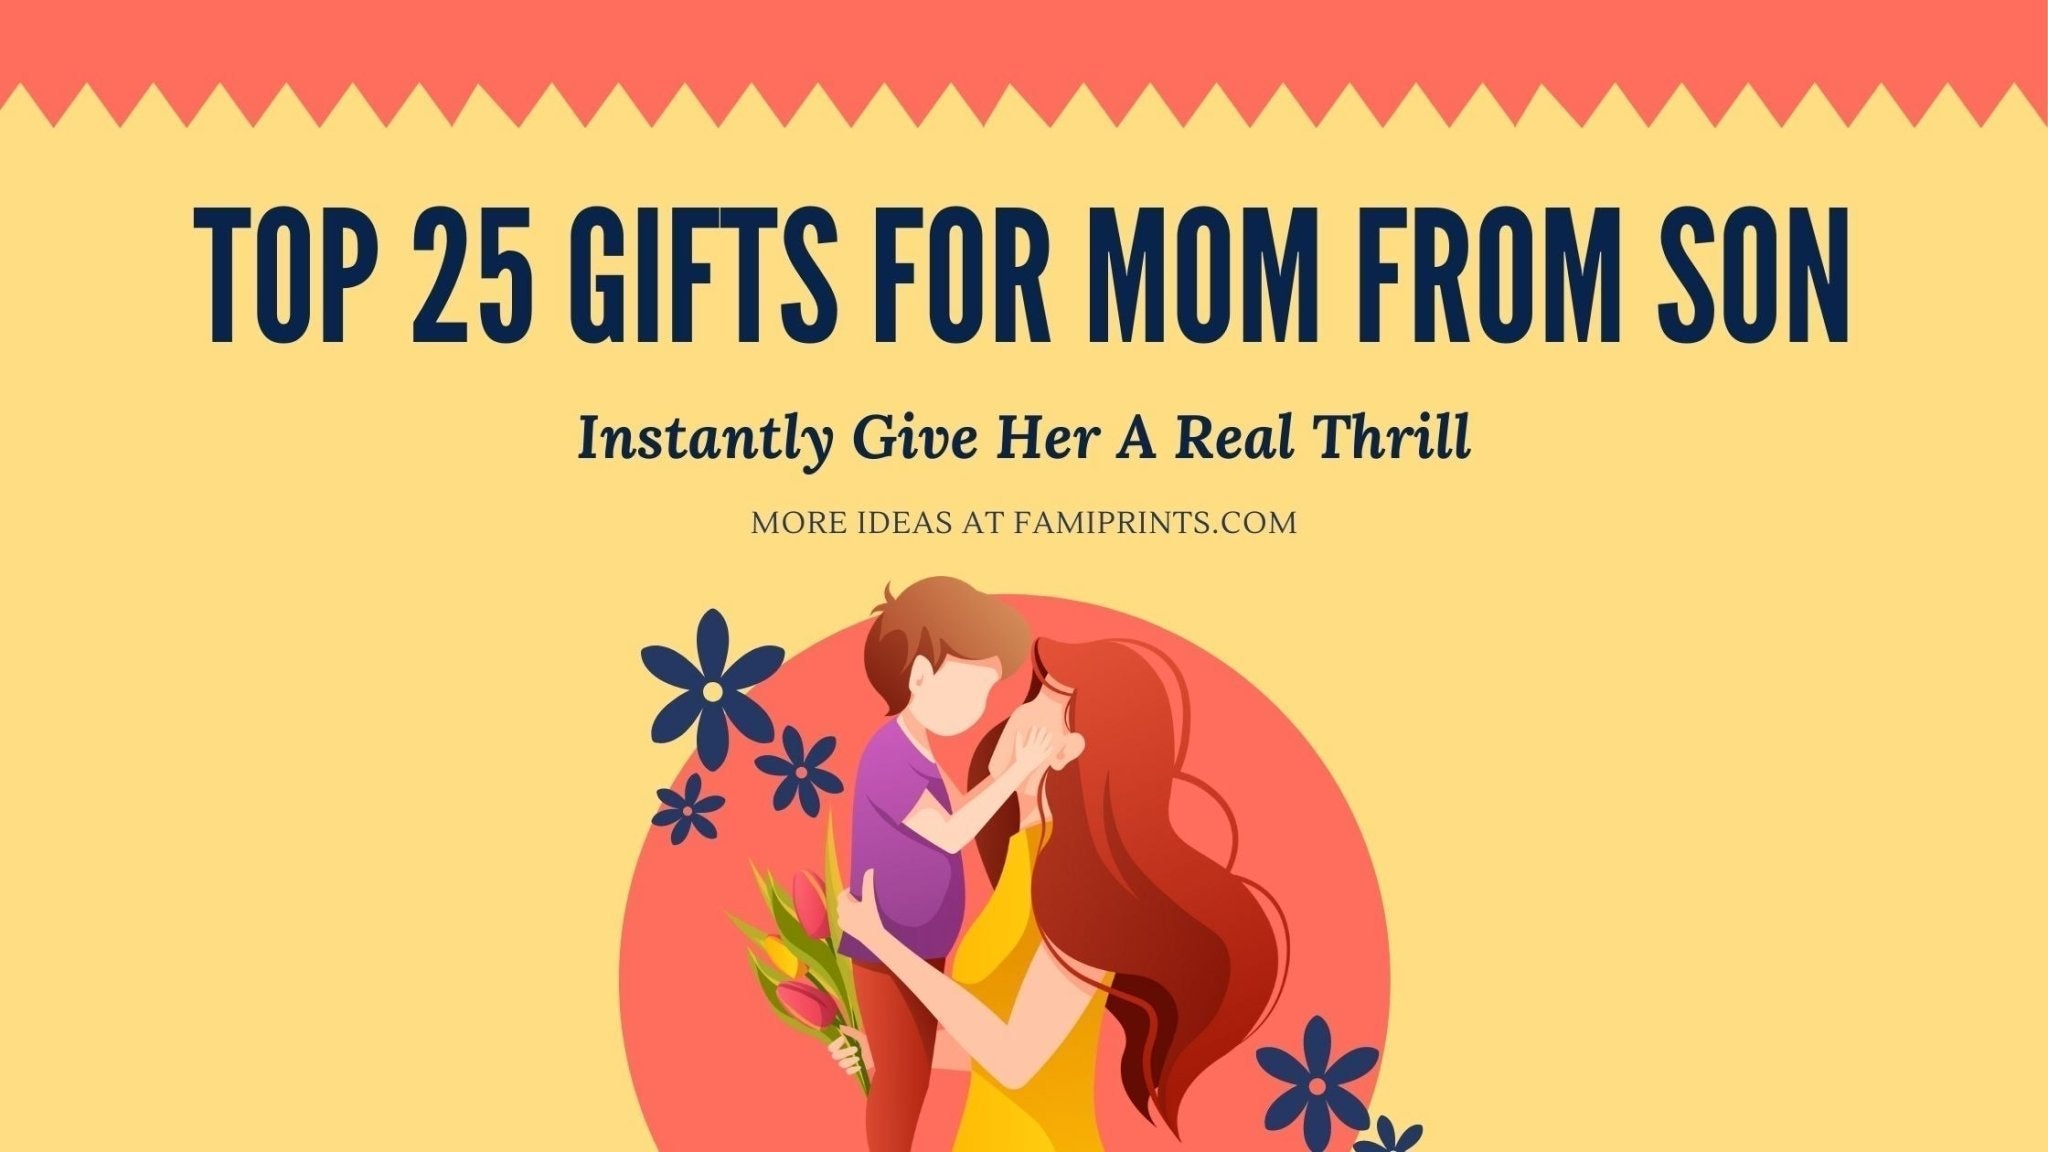 http://famiprints.com/cdn/shop/articles/top-25-gifts-for-mom-from-son-instantly-give-her-a-real-thrill-666708.jpg?v=1659863408